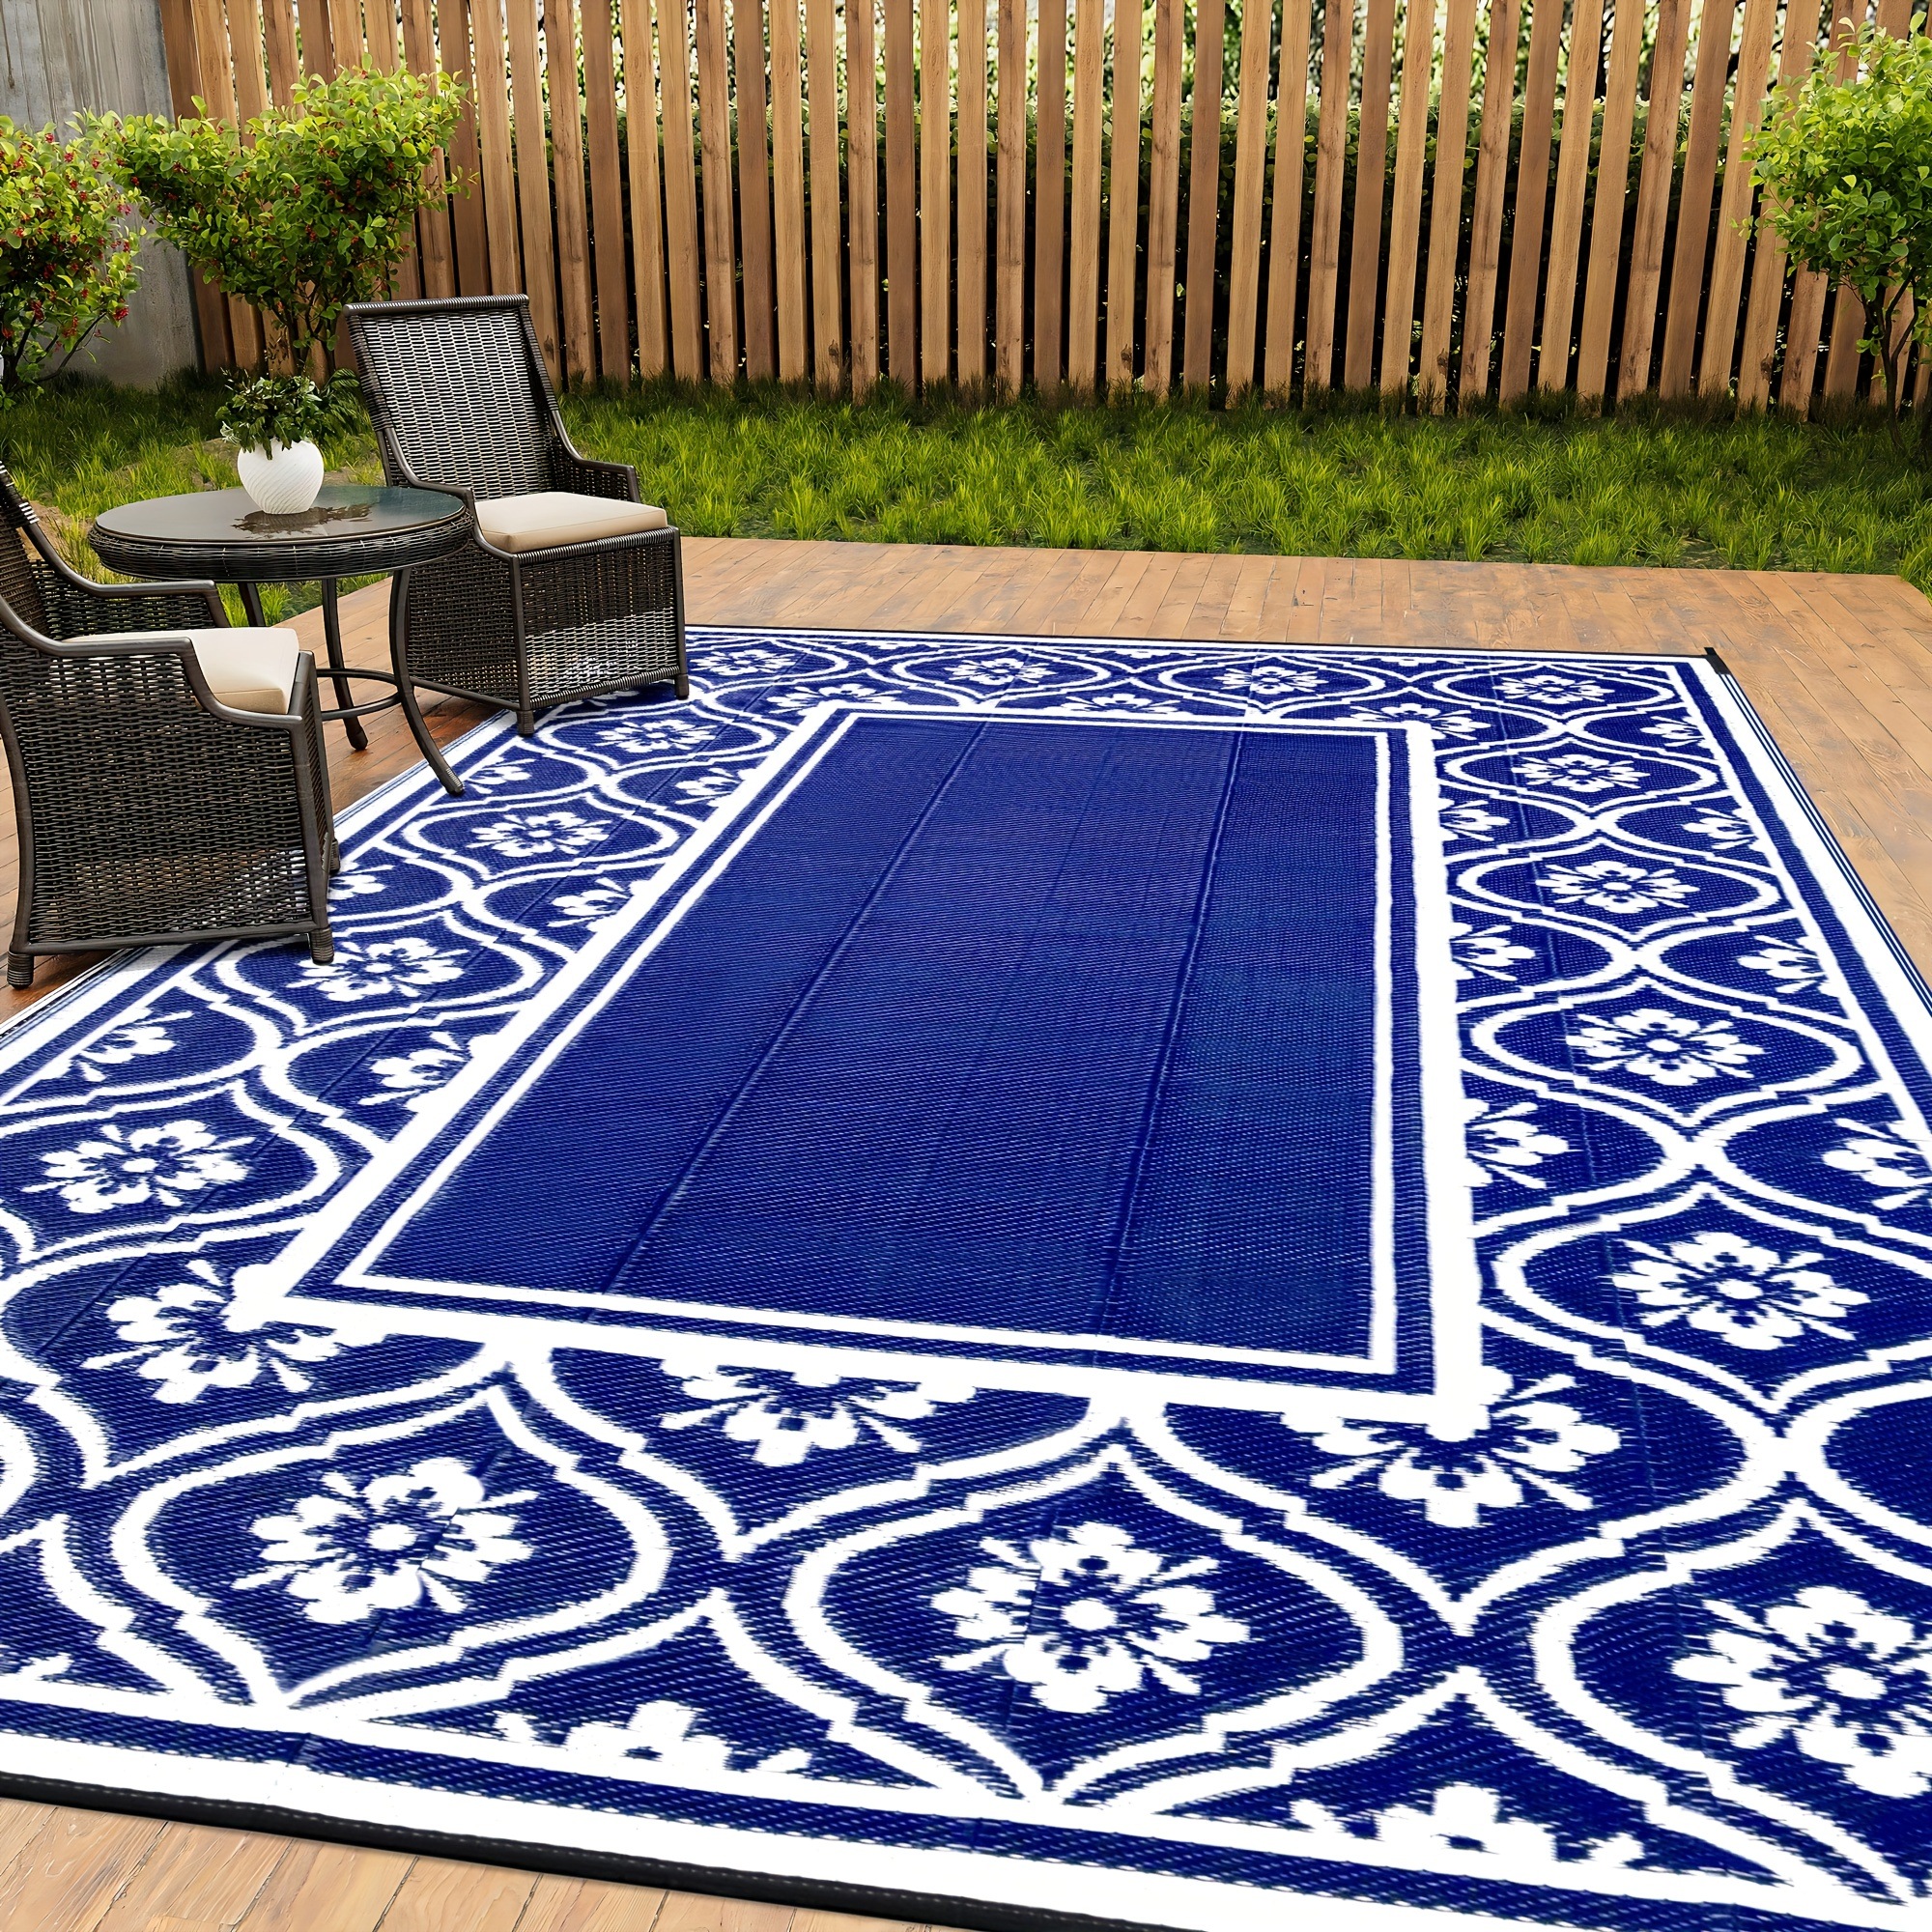 MCOW 0 Mcow Outdoor Rugs 9X12 For Patios Clearance, Rv Camping Mat  Waterproof, Reversible Plastic Straw Rug For Outside, Deck, Camper